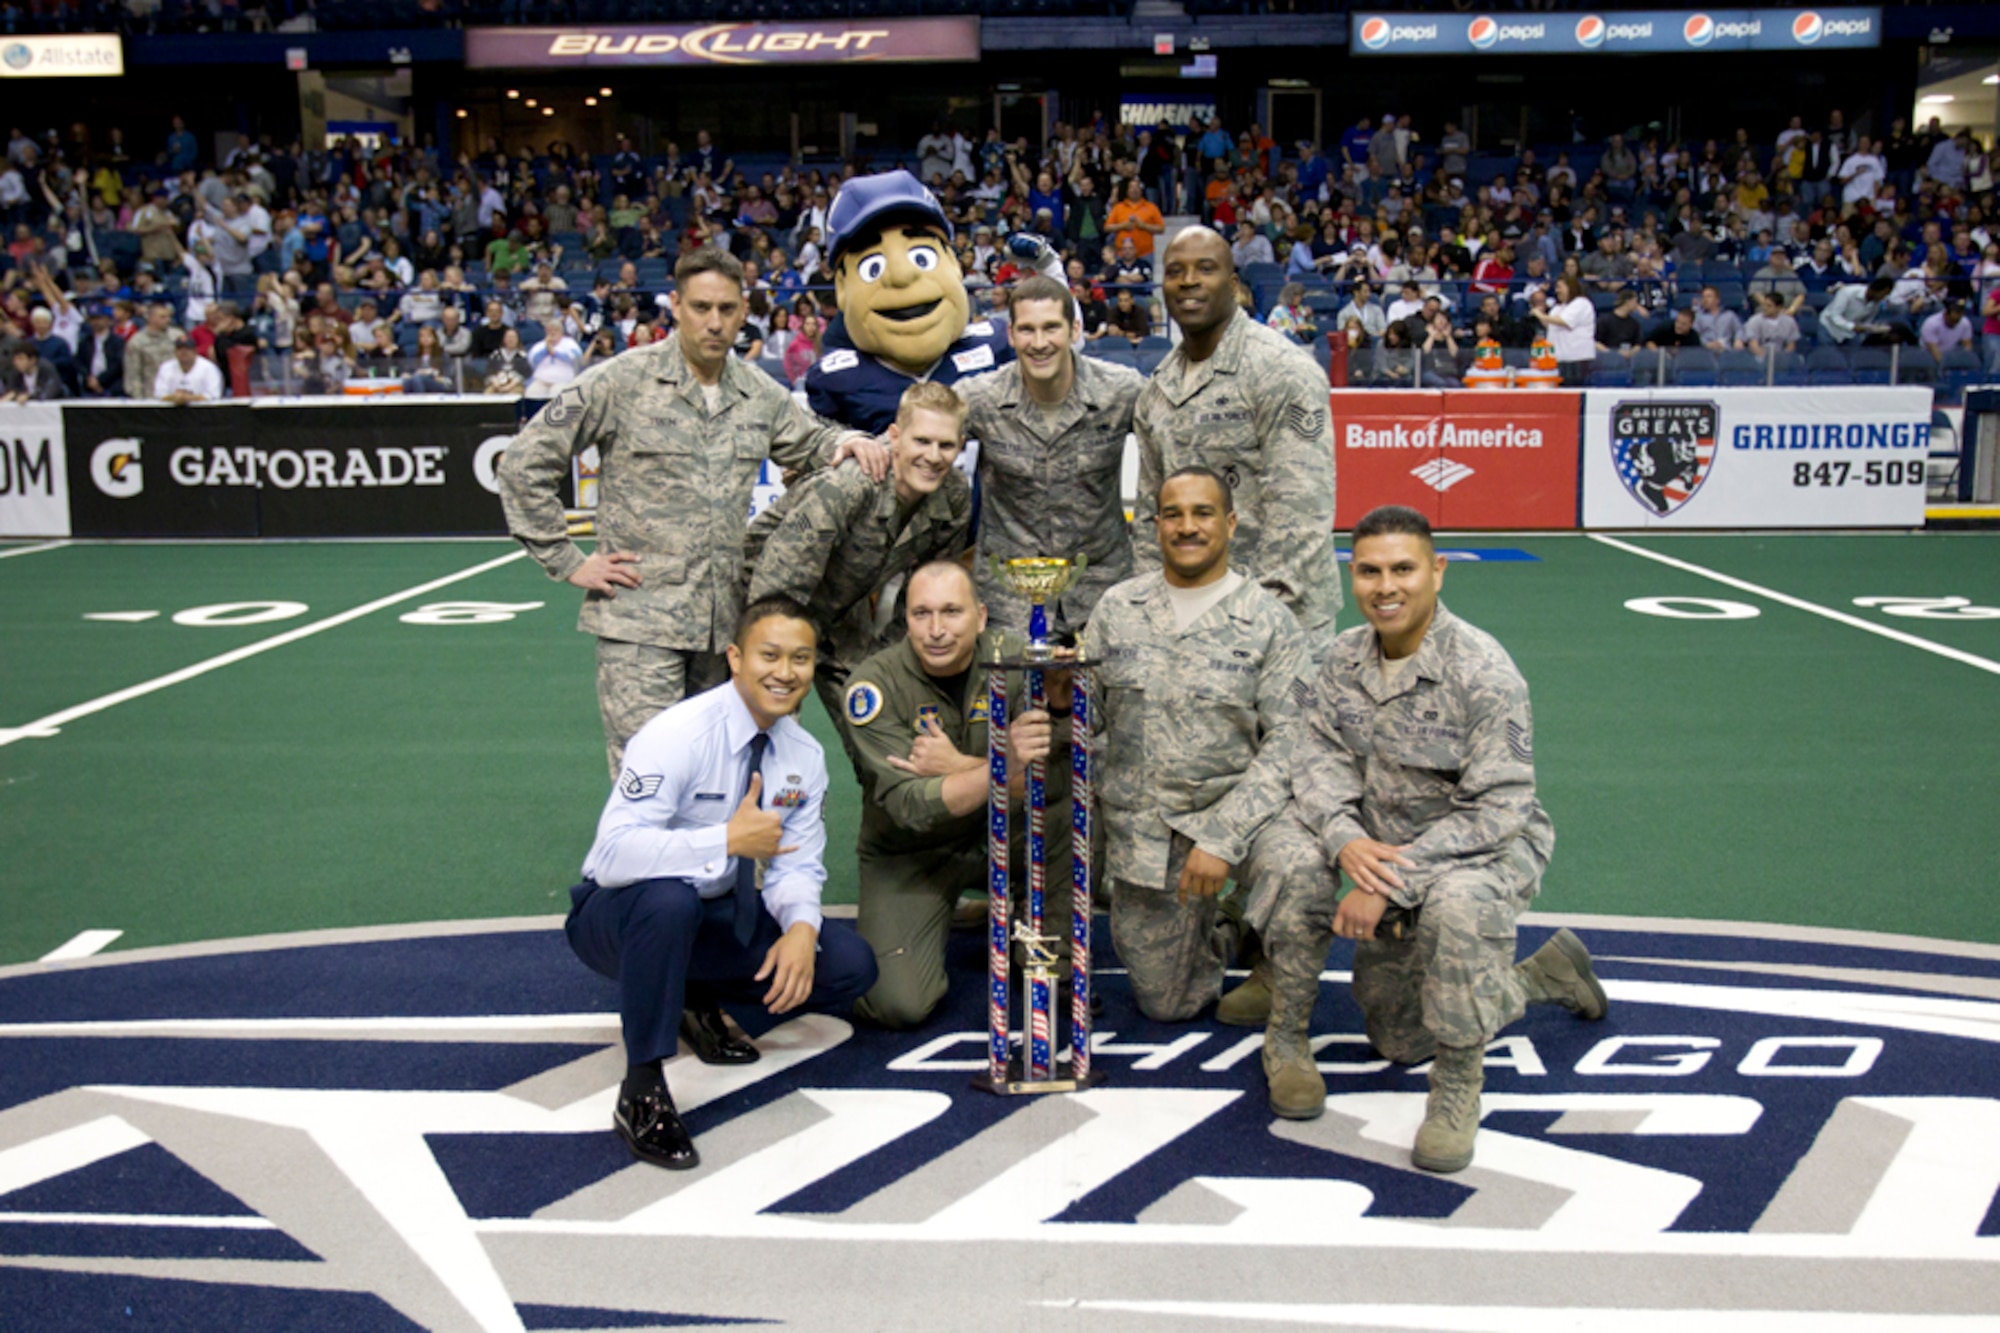 The 347th Recruiting Squadron's Chicago-area recruiters beat Army and Navy squads at halftime in front of 10,000 arena league football fans on Armed Forces Day May 15. Airmen posing with the Heroes Cup and Chicago Rush mascot are, left to right: kneeling, Staff Sgt. Johnson Xaysana, Master Sgt. Joey Minor, Tech. Sgt. Sean Sawyers, Tech. Sgt. Mario Cardoza; standing, Master Sgt. Chris Van Tine, Senior Airman Cedric Hill, Staff Sgt. Shaun McGlynn and Tech. Sgt. Al Lomax. (U.S. Air Force photo)